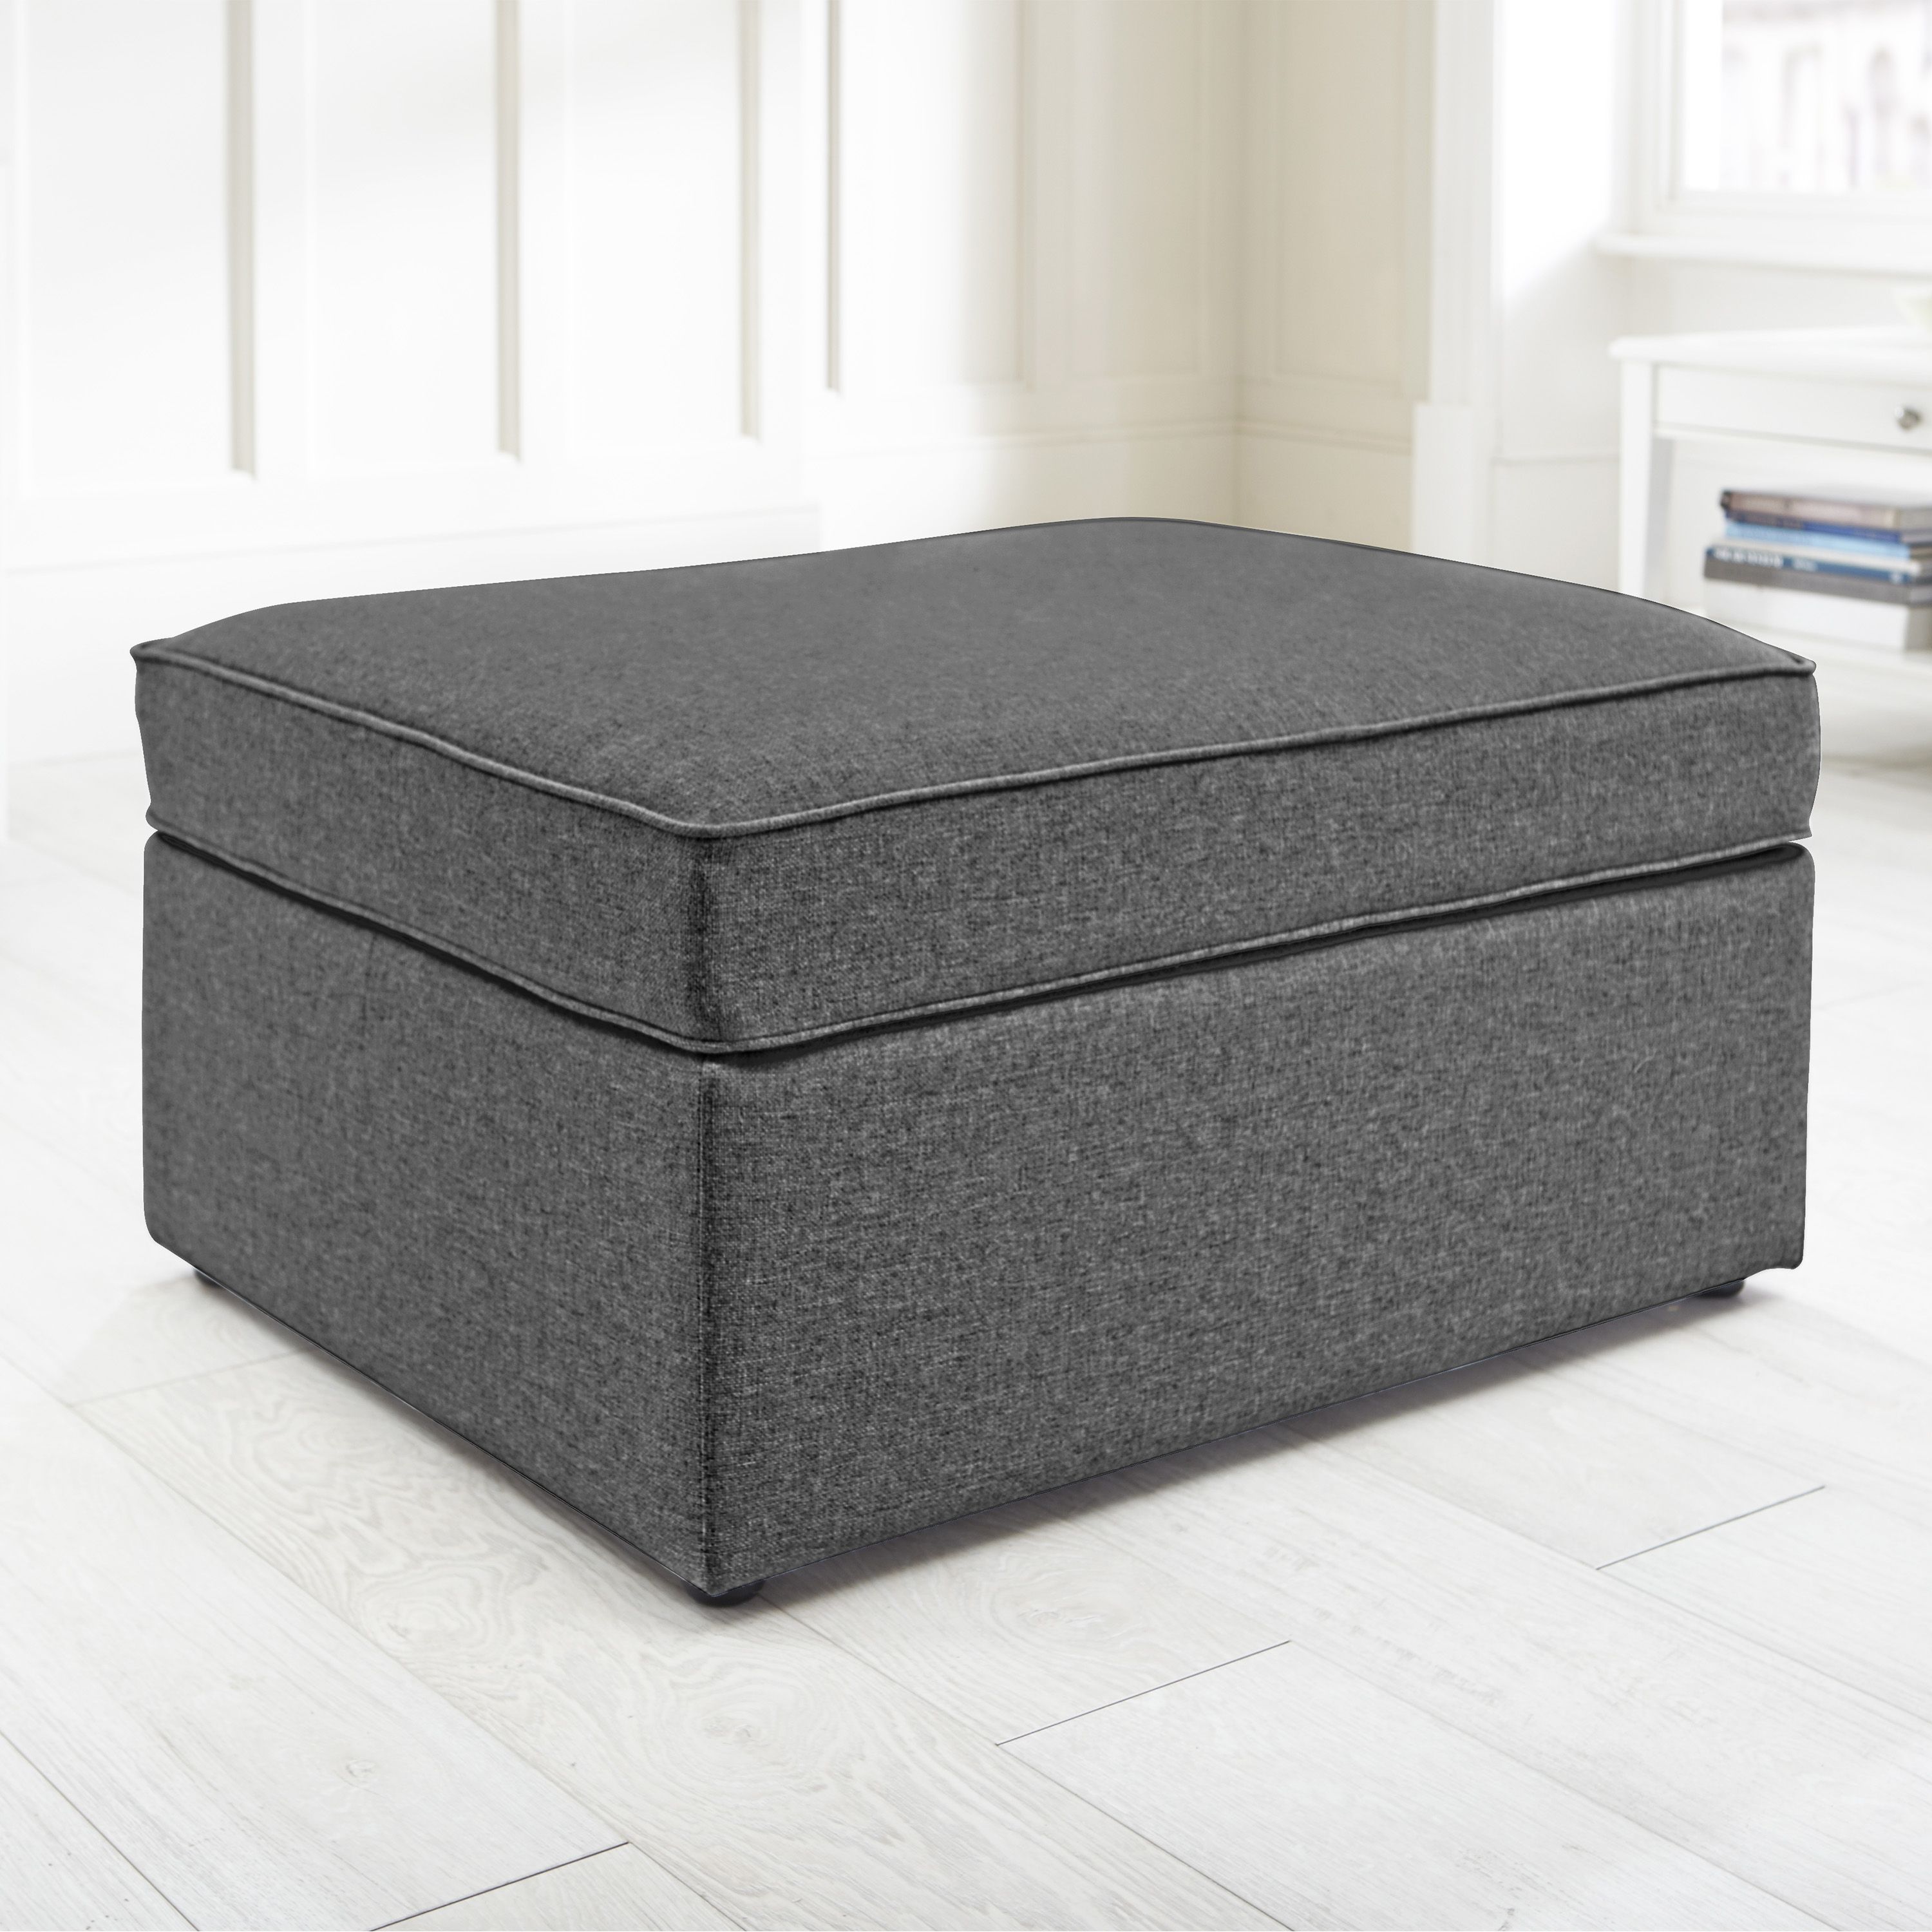 Jay-Be Raven Footstool bed